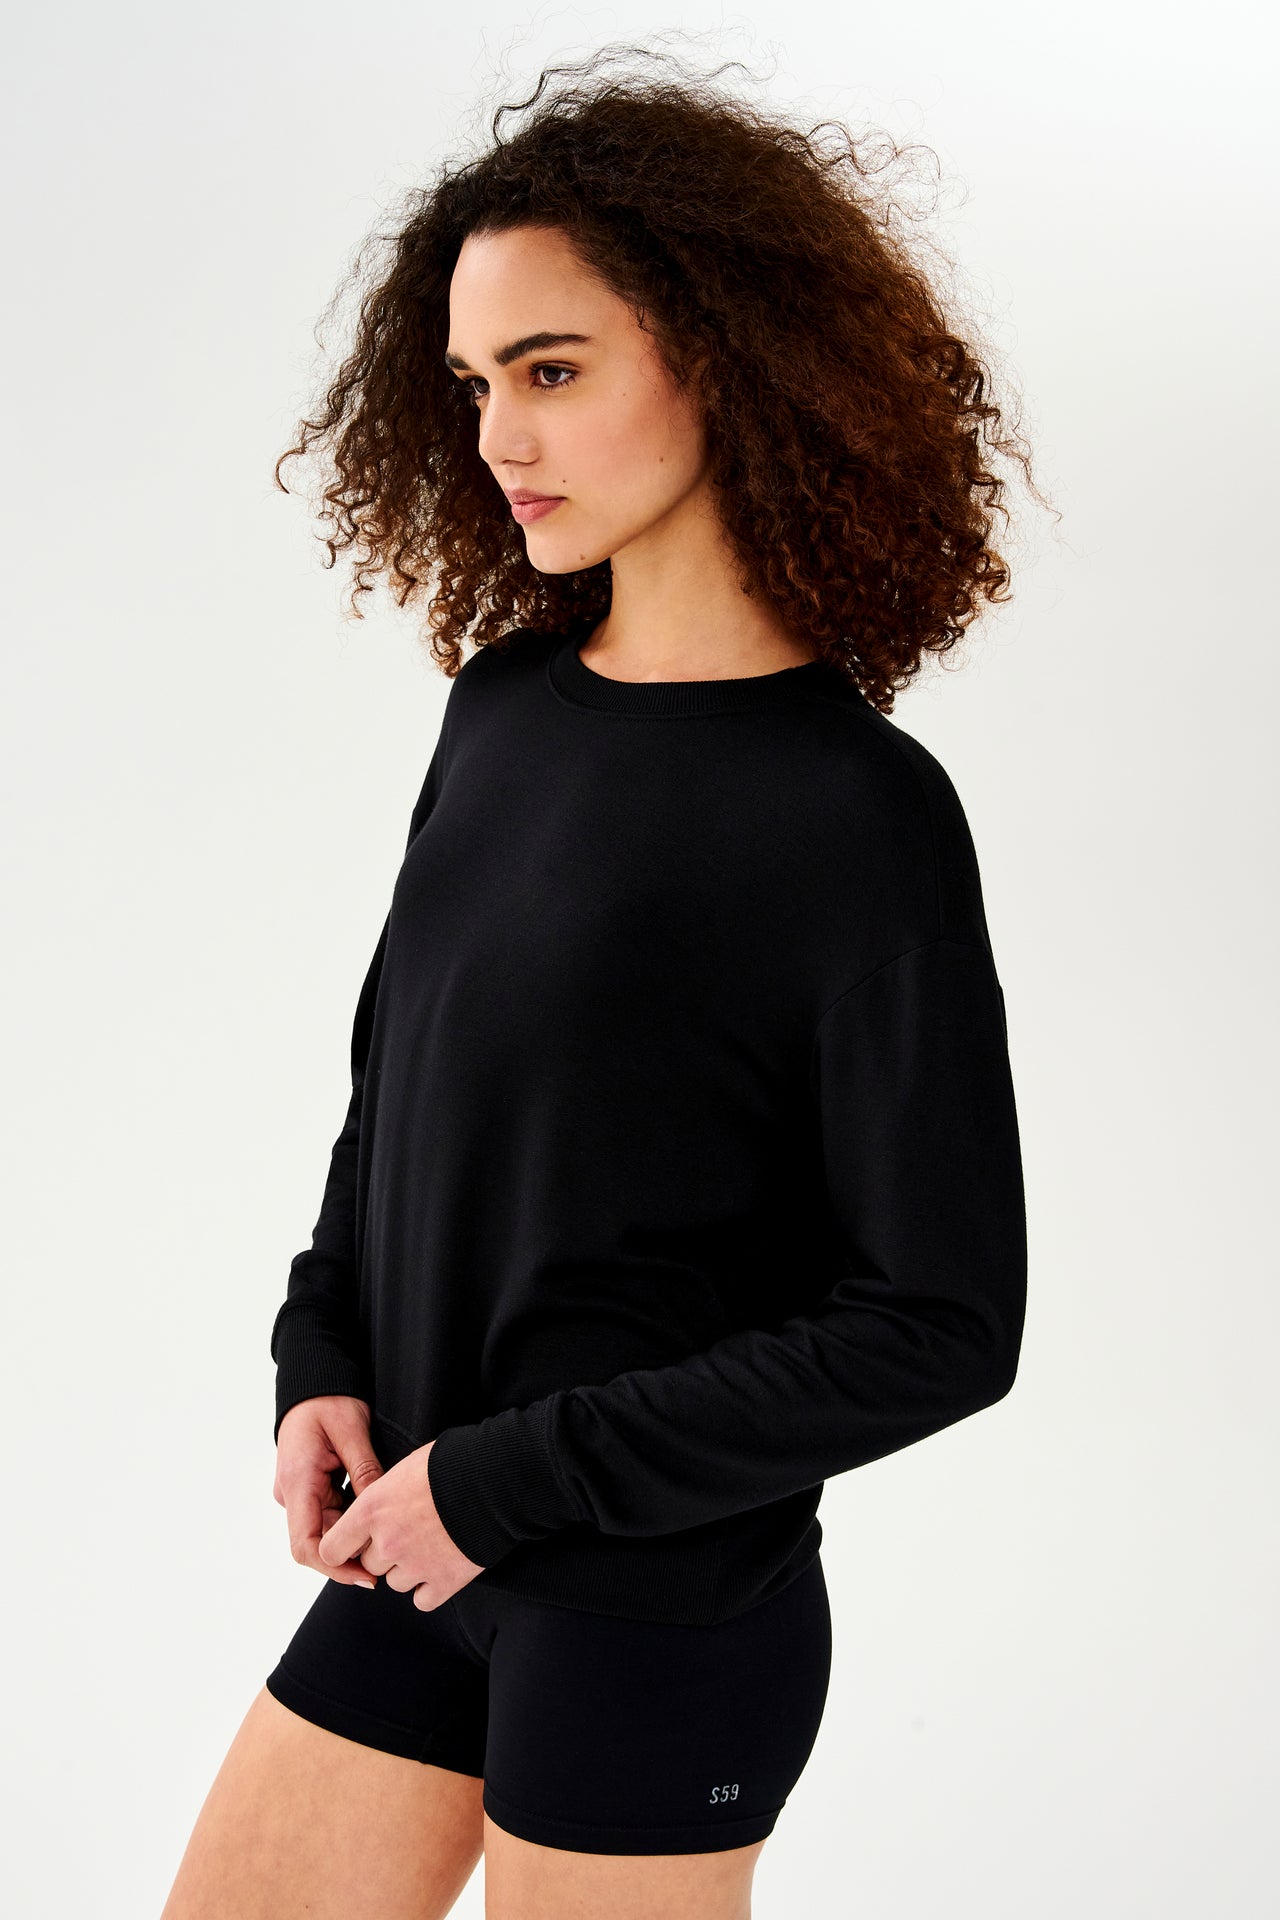 Front side view of woman with curly dark brown hair wearing a black crewneck sweatshirt and black shorts 